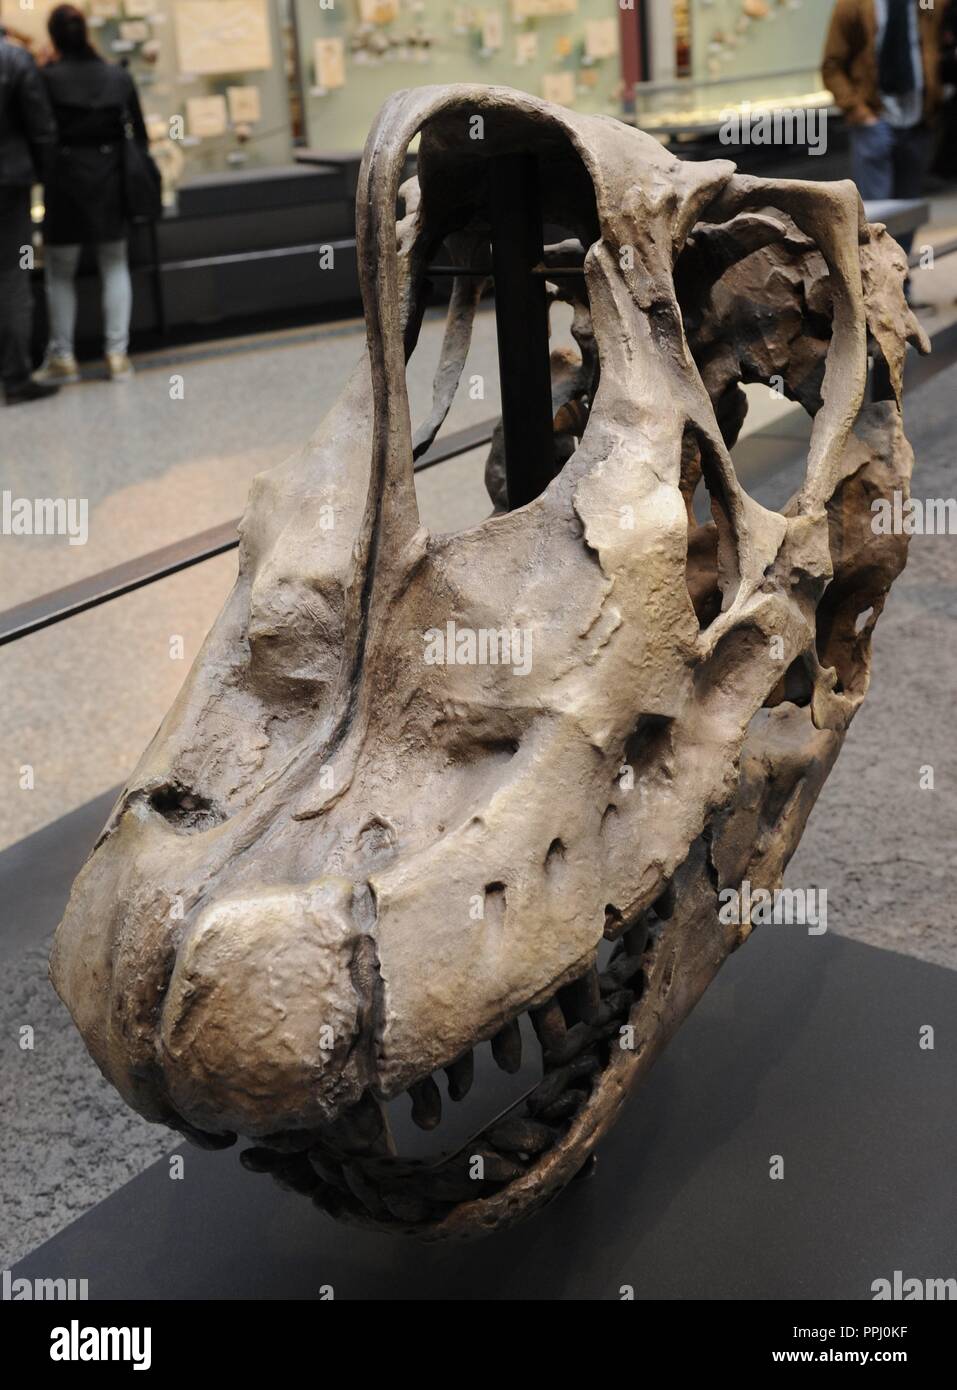 Dinosaurs hall. Skull of a Brachiosaurus, genus of dinosaurs sauropods braquiosáuridos, that lived at the end of the Jurassic period, approximately 152 and 145 million years ago. Museum fur Naturkunde (Museum of Natural History). Berlin Germany. Europe. Stock Photo